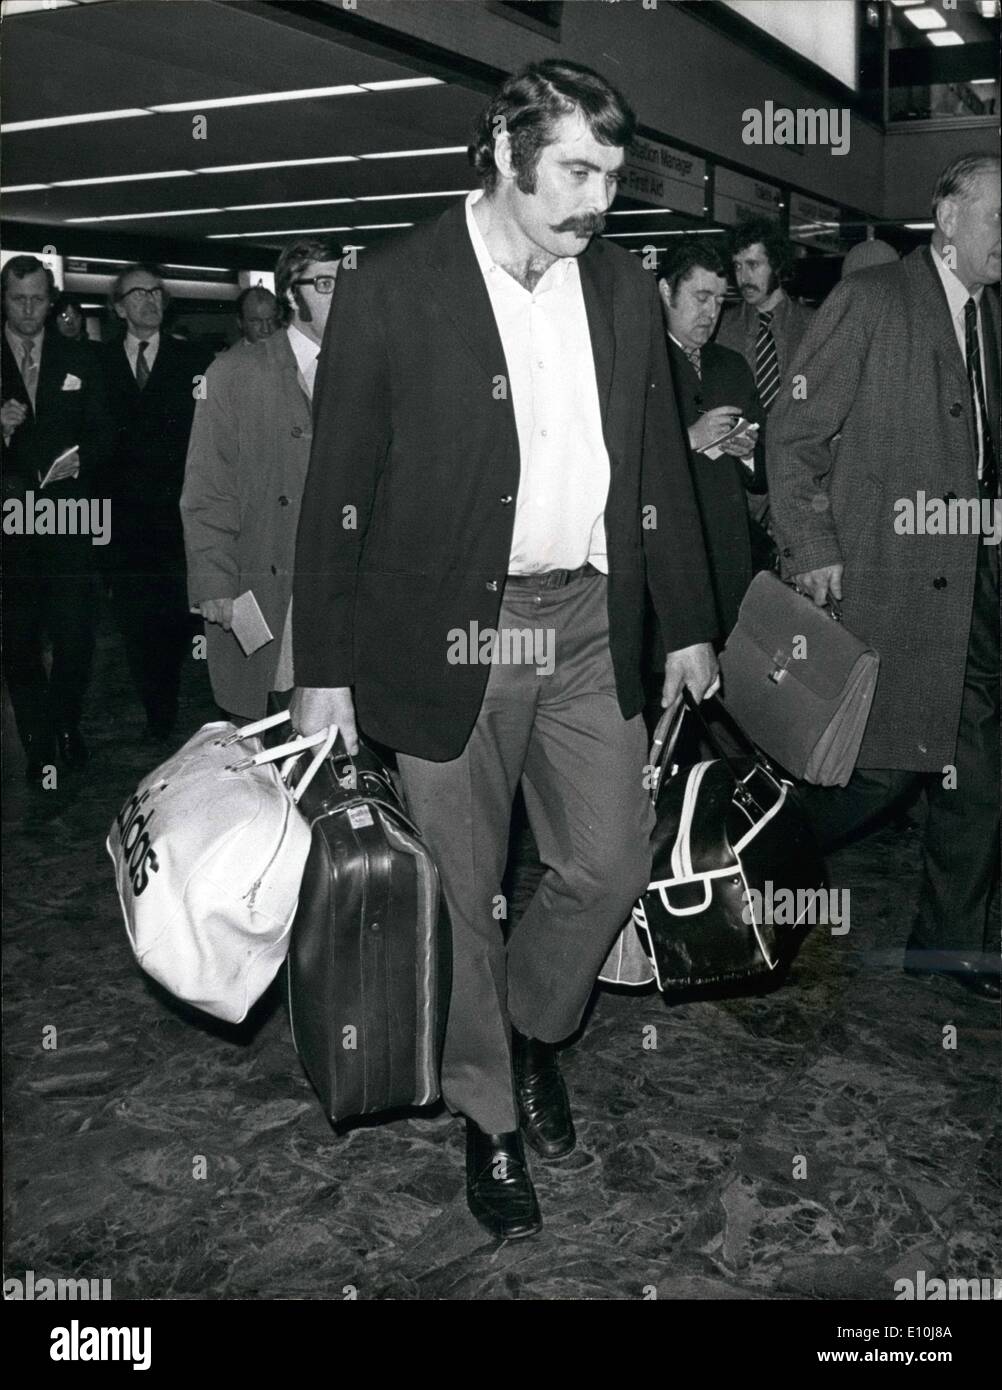 Dec. 12, 1972 - Keith Murdoch, The All Blacks Forward is Sent Home - Keith Murdoch, the 17-Stone All Blacks Prop forward, was sent home to New Zealand last night, because of an incident at a Cardiff hotel where the team was celebrating its win over Wales. A Security guard said Murdoch gave him a black eye. Photo Shows: Keith Murdoch, the All Blacks Prop Forward, arrving at Euston Station from Biringham, on his way home to New Zealand. Stock Photo